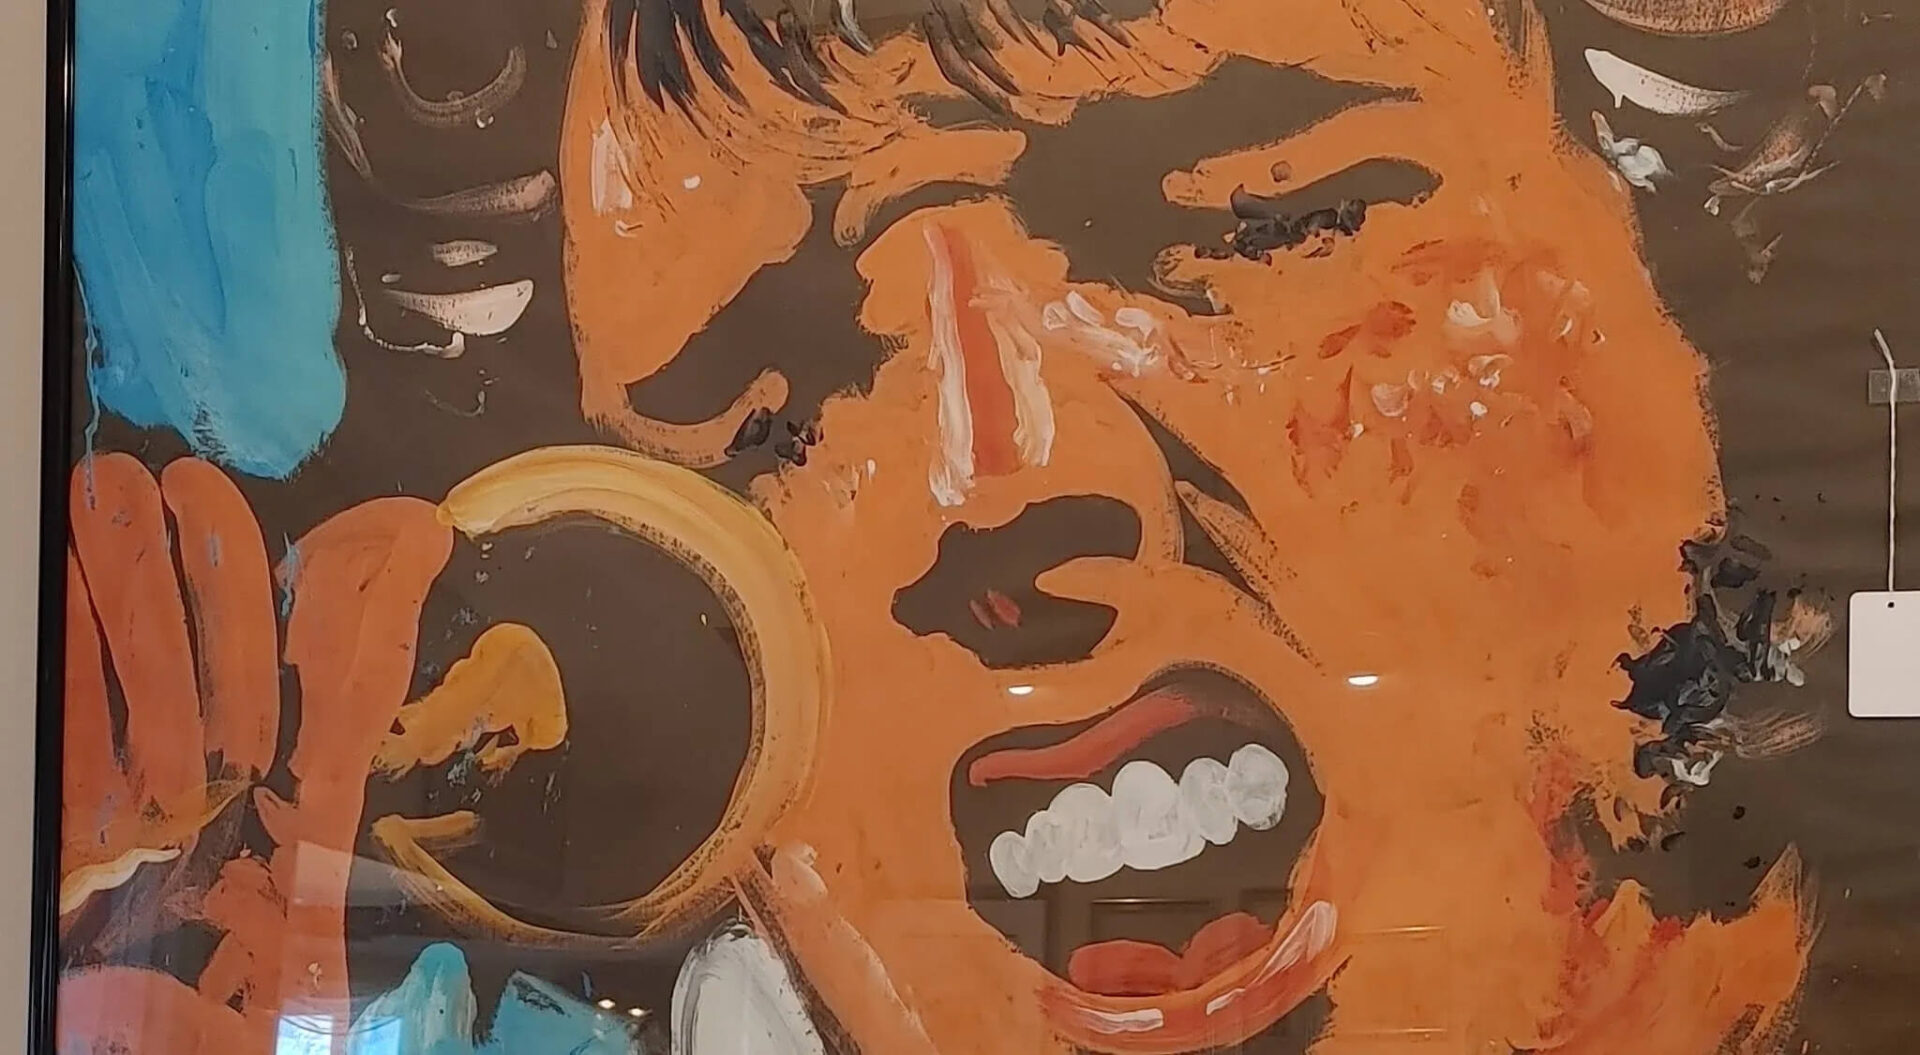 A painting of a man with his mouth open